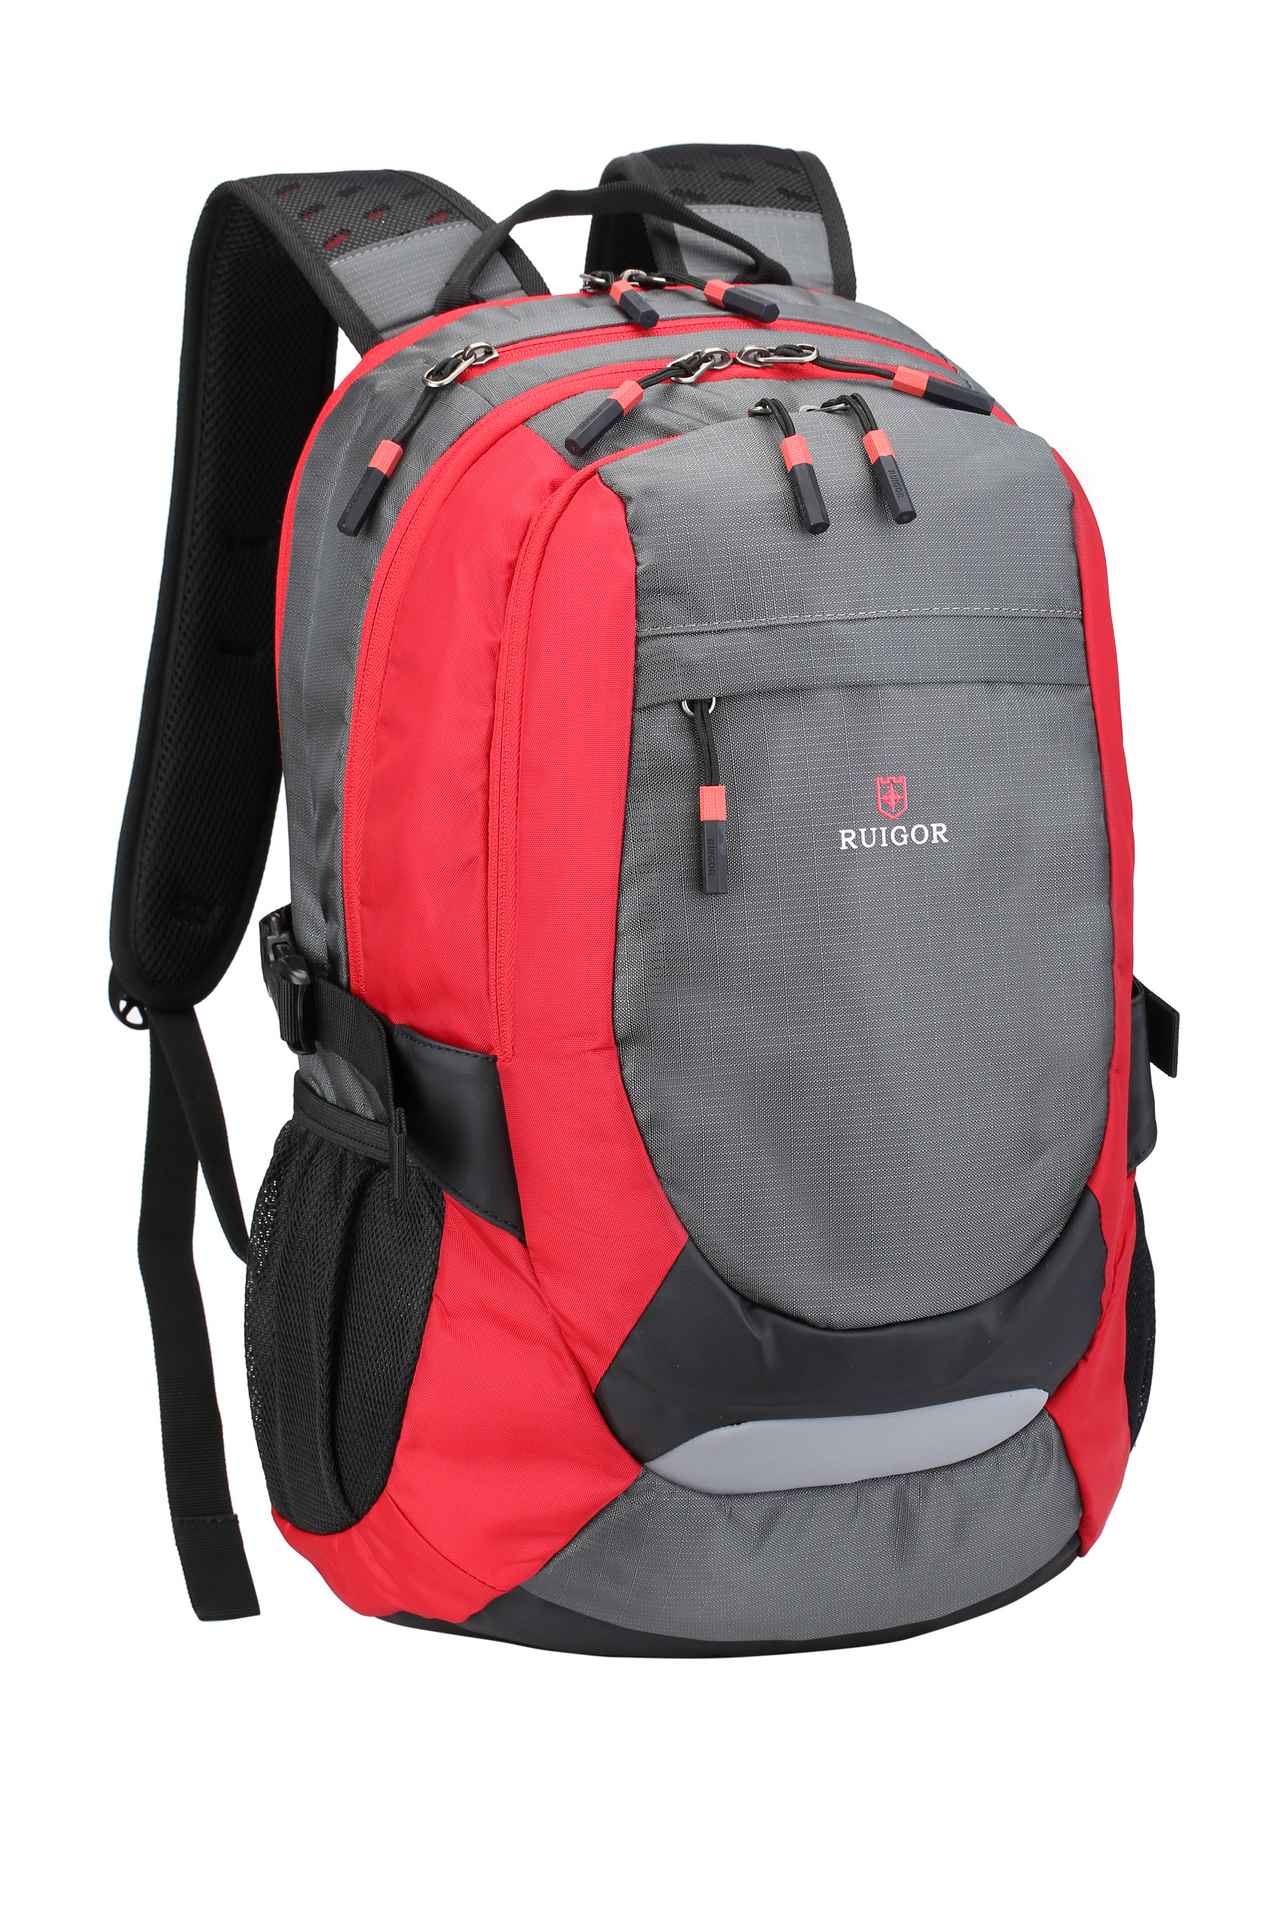 Buy Manfrotto Advanced Active Sling 2 Aling Bag online from Sharp Imaging